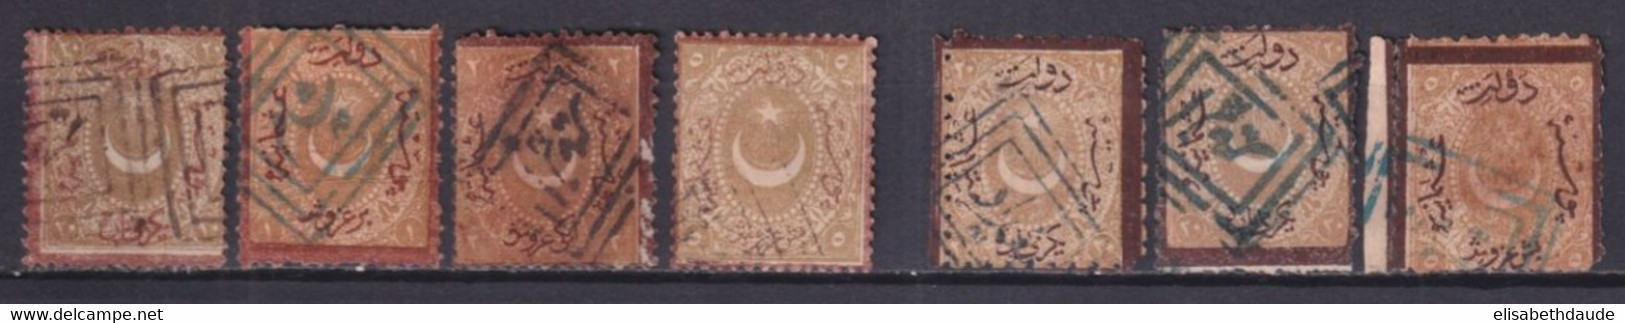 TURQUIE - 1869/71 - TAXE YVERT N°15/18 + 20/20a + 23 OBLITERES - COTE = 125 EUR - Used Stamps